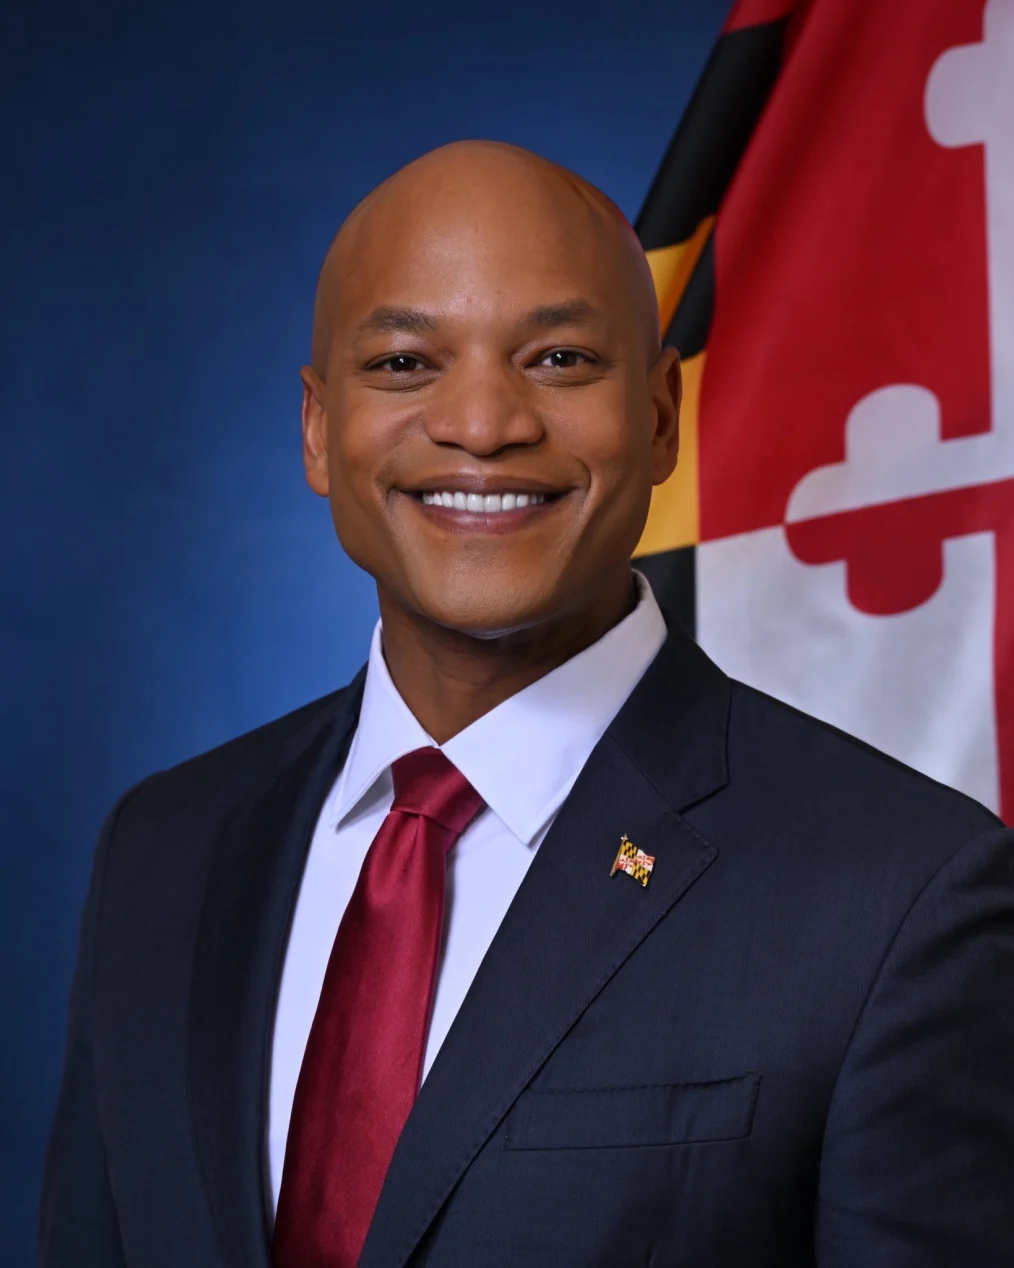 A Black man with a bald head smiles, showing his top row of teeth. He wears a black suit jacket over a white collared shirt with a red tie and a flag lapel pin. Behind him is part of the Maryland state flag, with red, yellow, white and black geometric shapes.